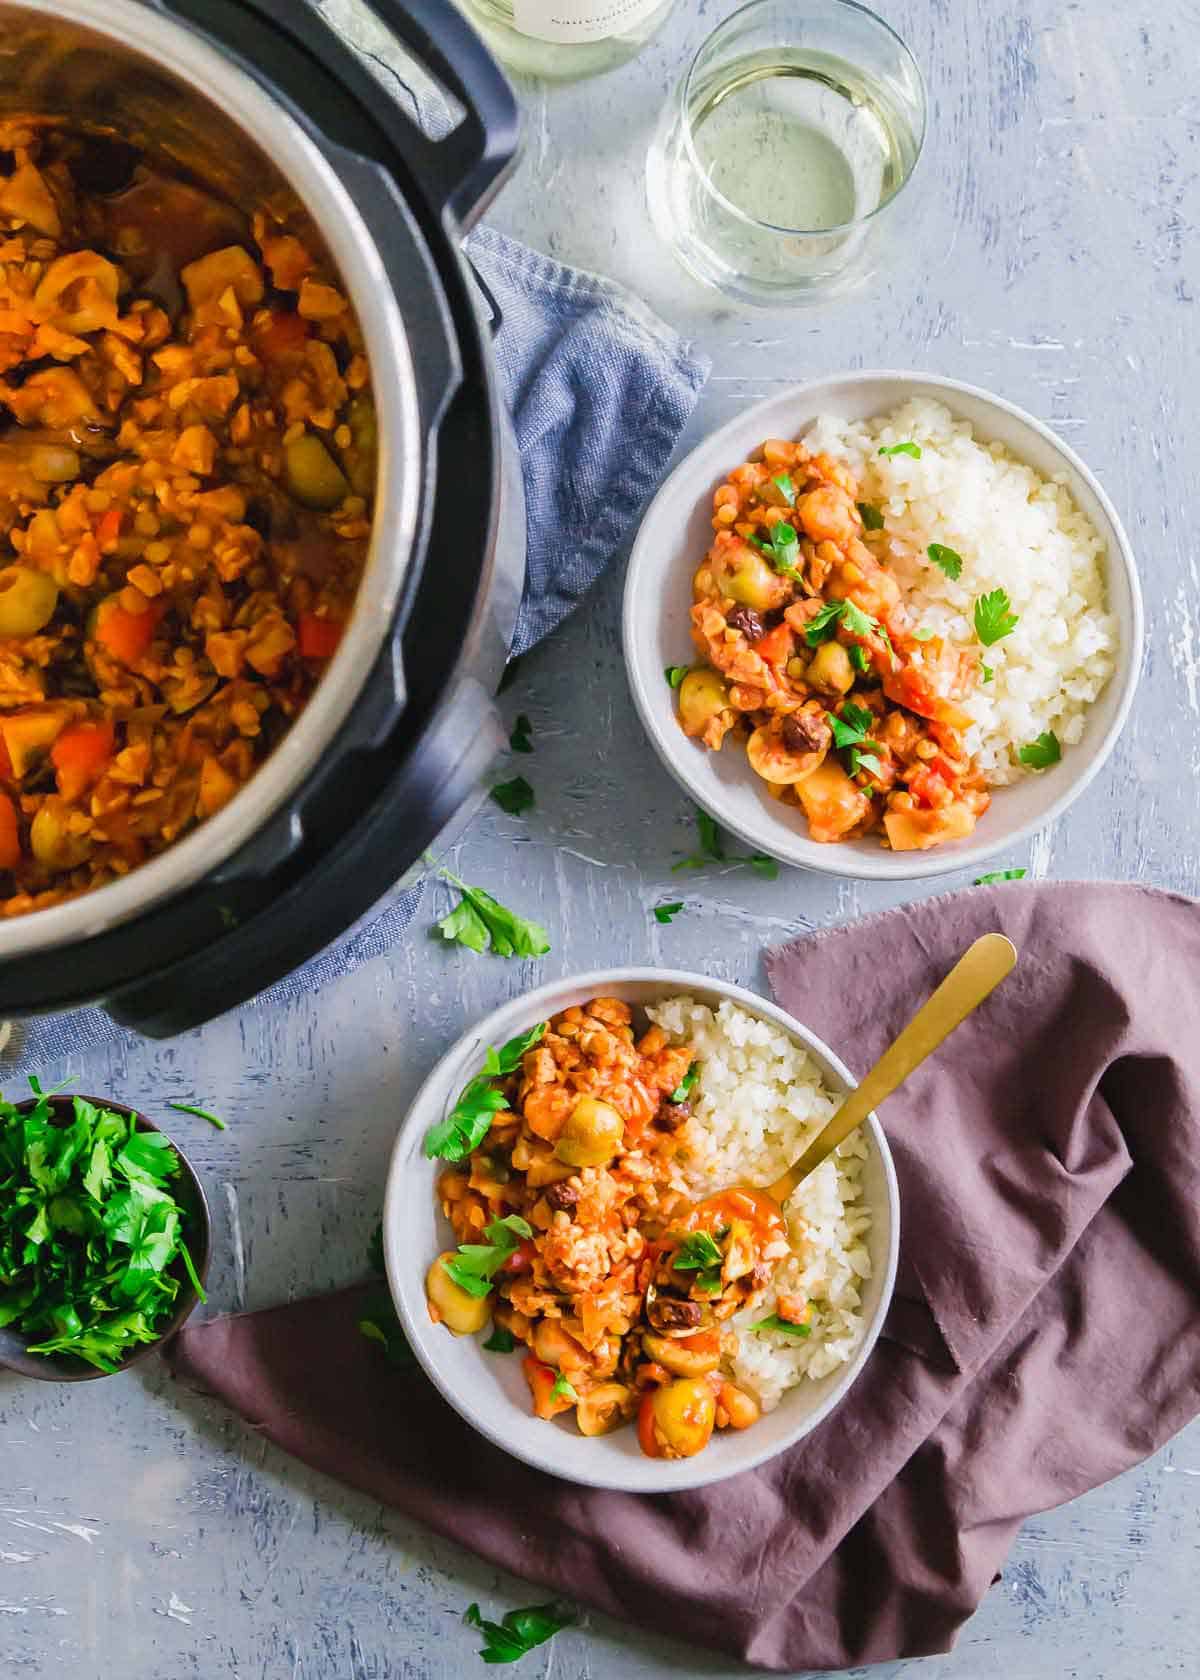 Vegan picadillo made in the Instant Pot is a healthy, plant based meal filled with flavor, spices and heartiness.